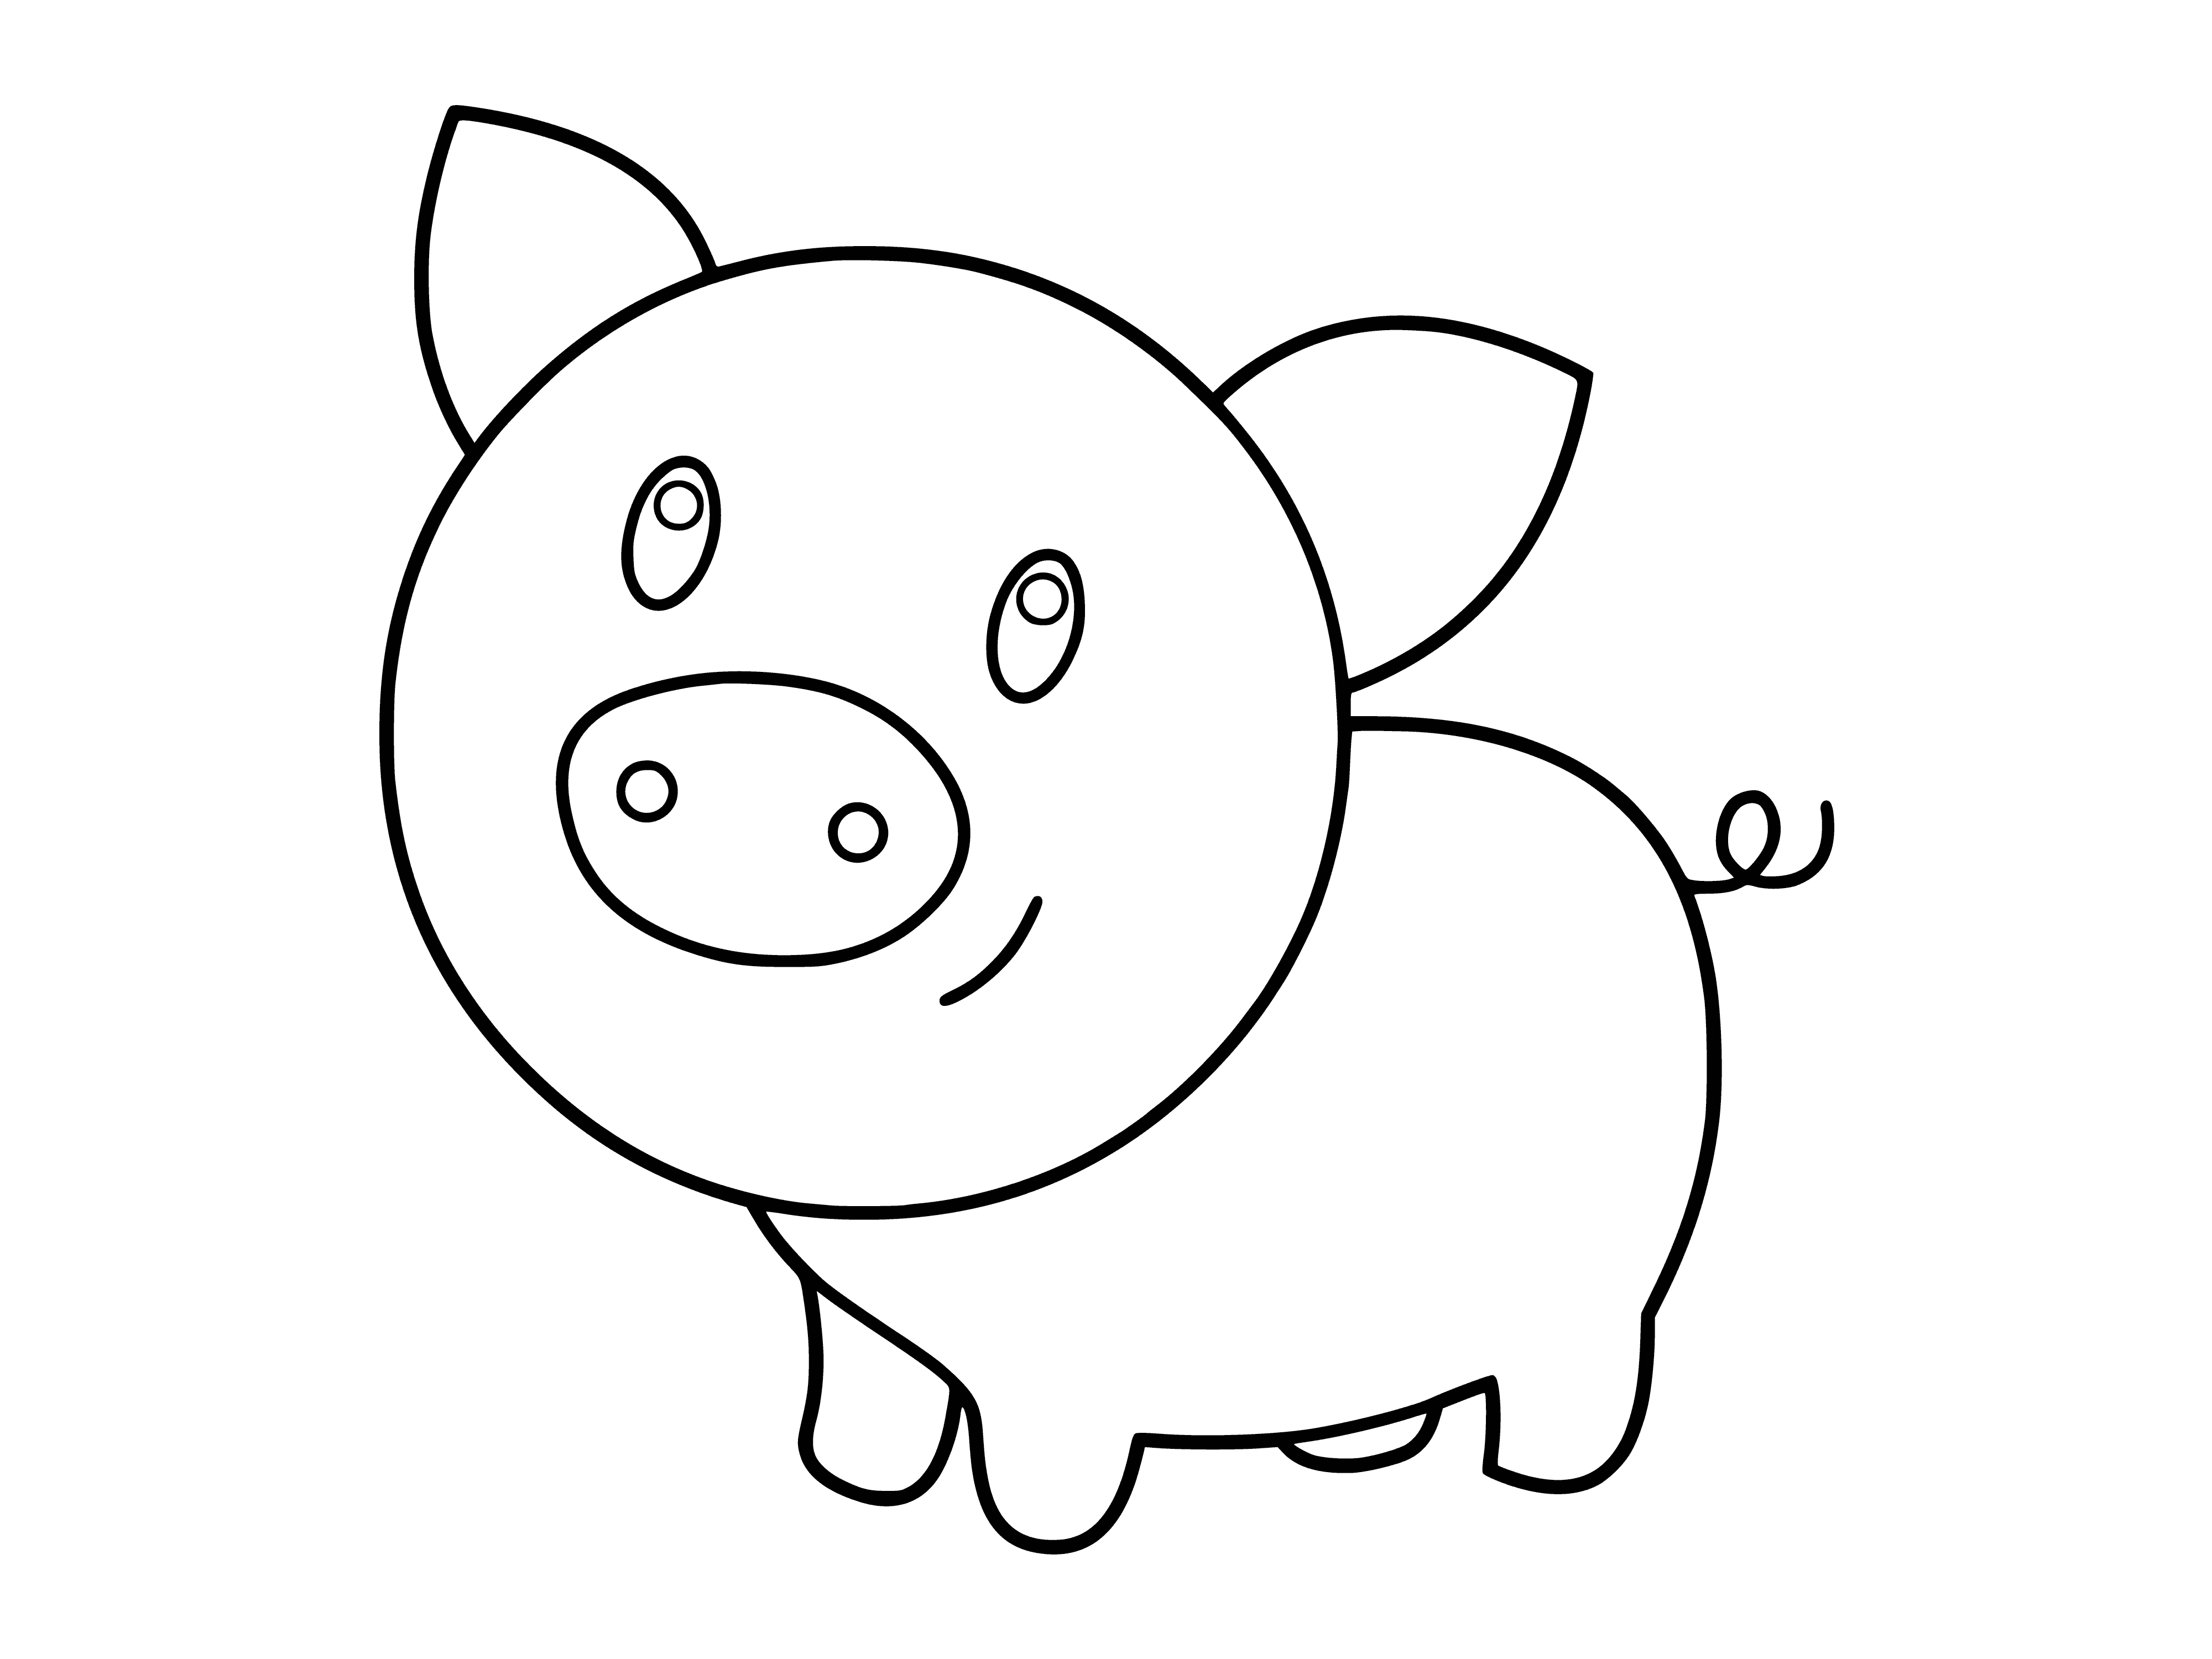 coloring page: Small, pink piglet with long snout, four legs, floppy ears & green leaf behind. Black eyes & curled tail complete the coloring page. #piglet